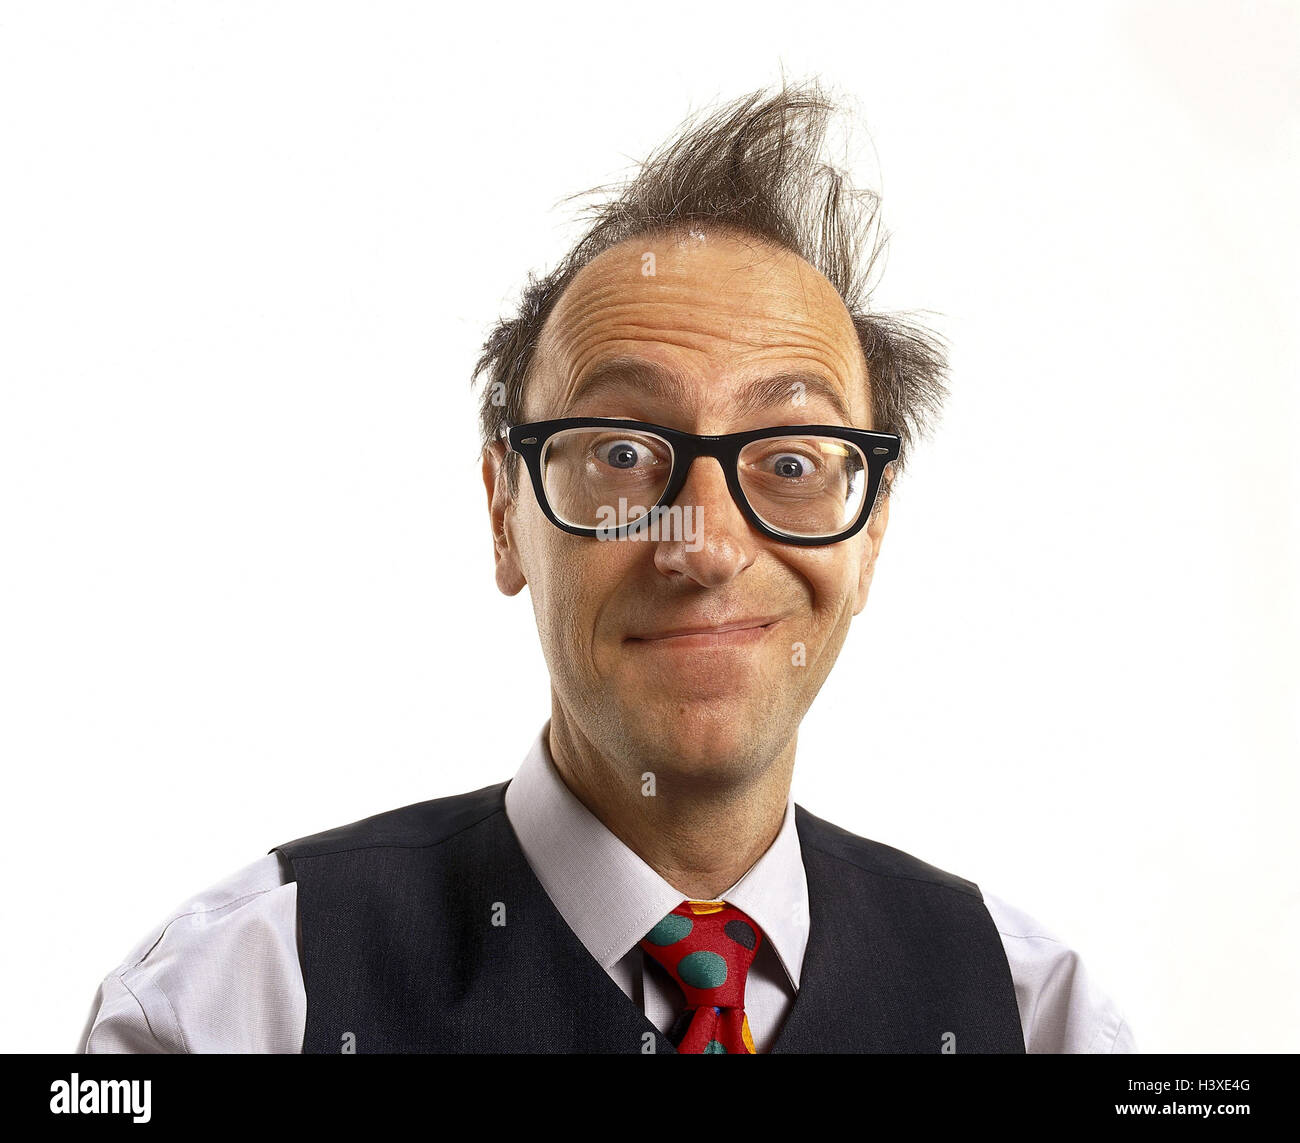 Man, middle old person, hairs, ruffles, chaotically, glasses, shirt,  waistcoat, tie, facial play, portrait, Men, studio, cut out, hairstyle,  disorderly, neglectedly, grimace, grin, astonished, is surprised,  surprised, confused, blocked Stock Photo -